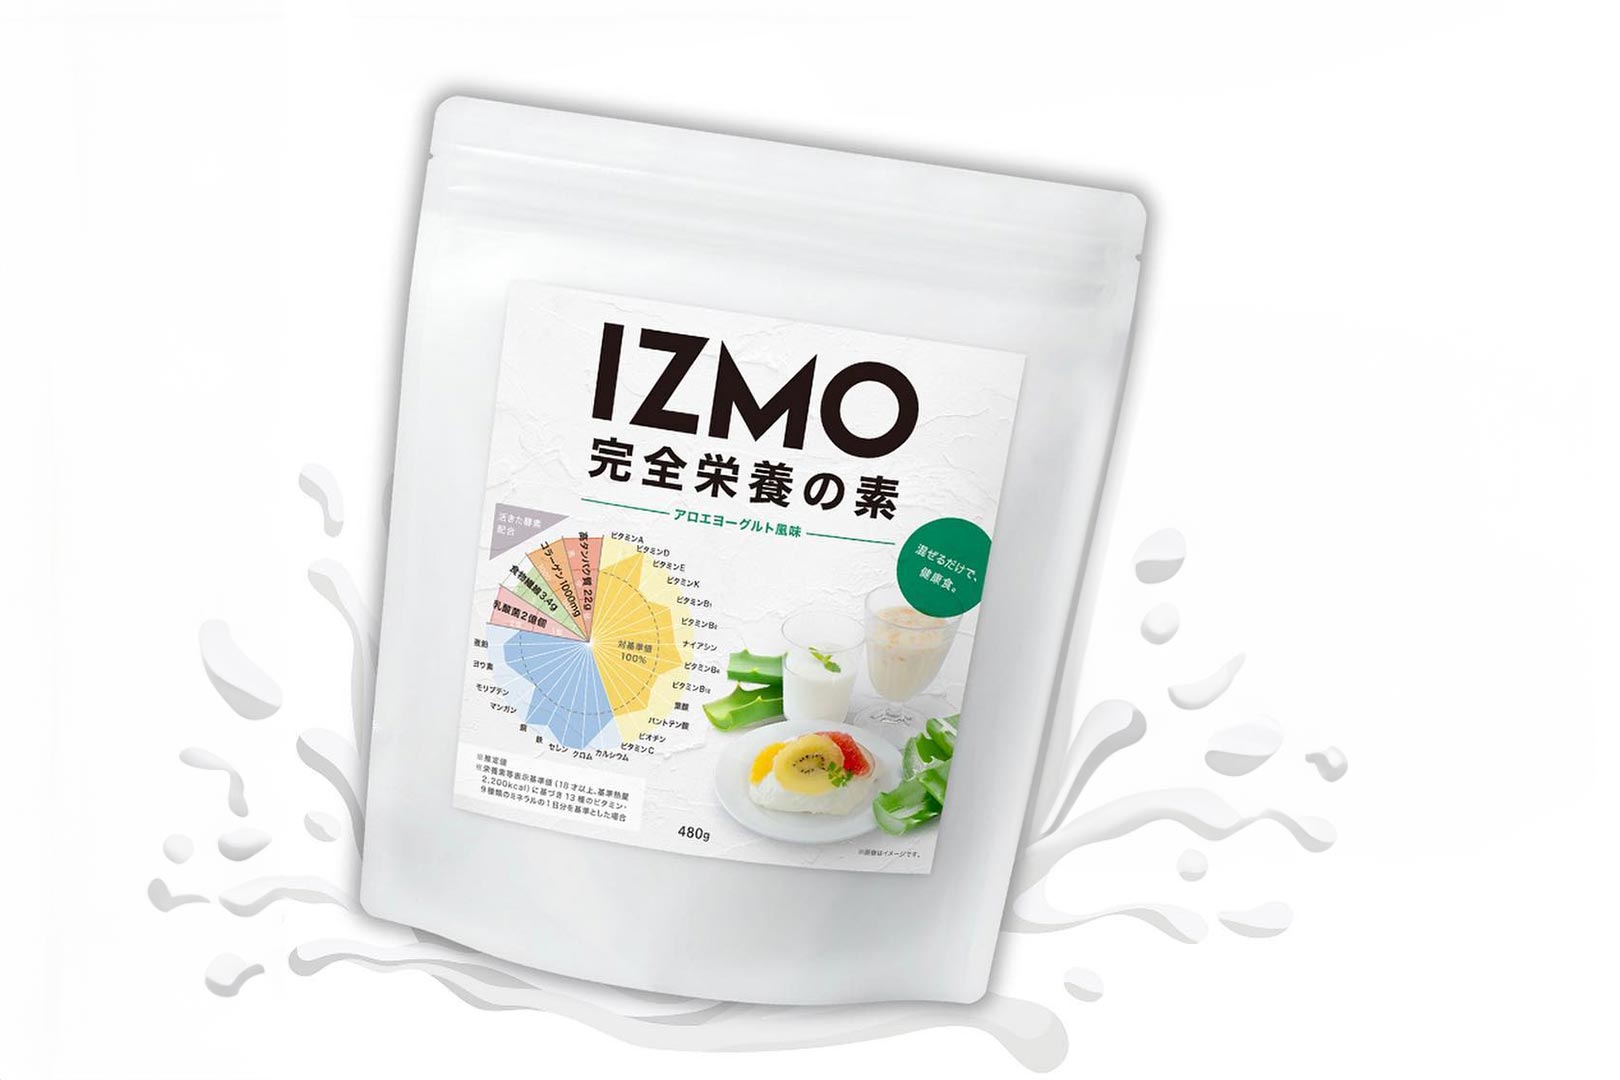 Alpron Izmo Meal Replacement